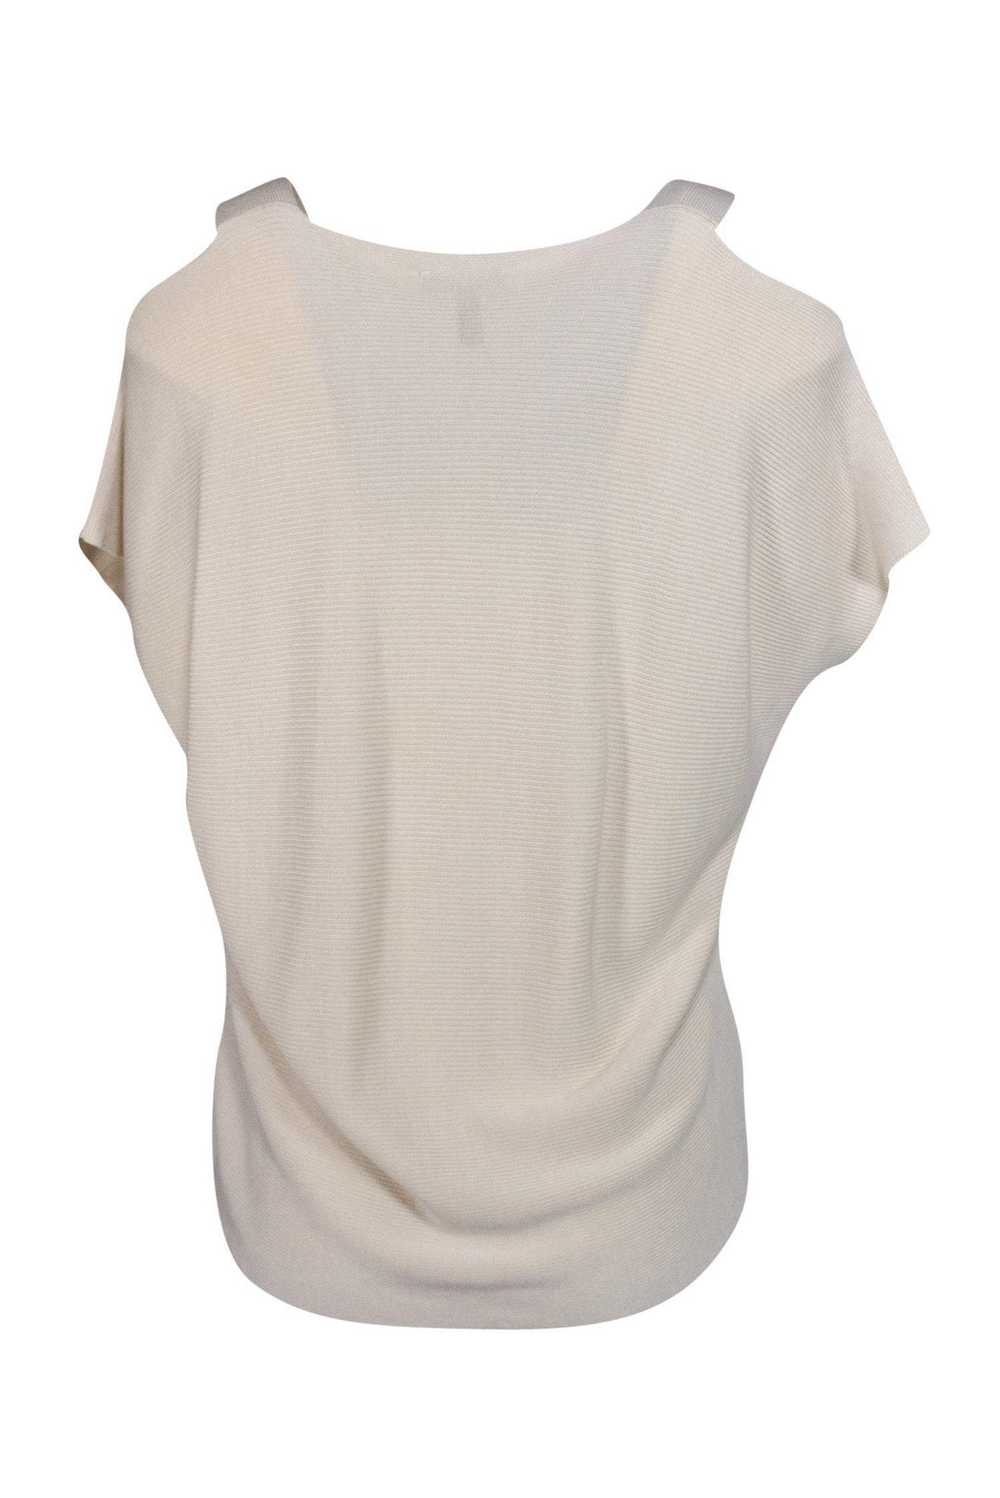 Eileen Fisher - Cream Ribbed Cold-Shoulder Knit T… - image 3